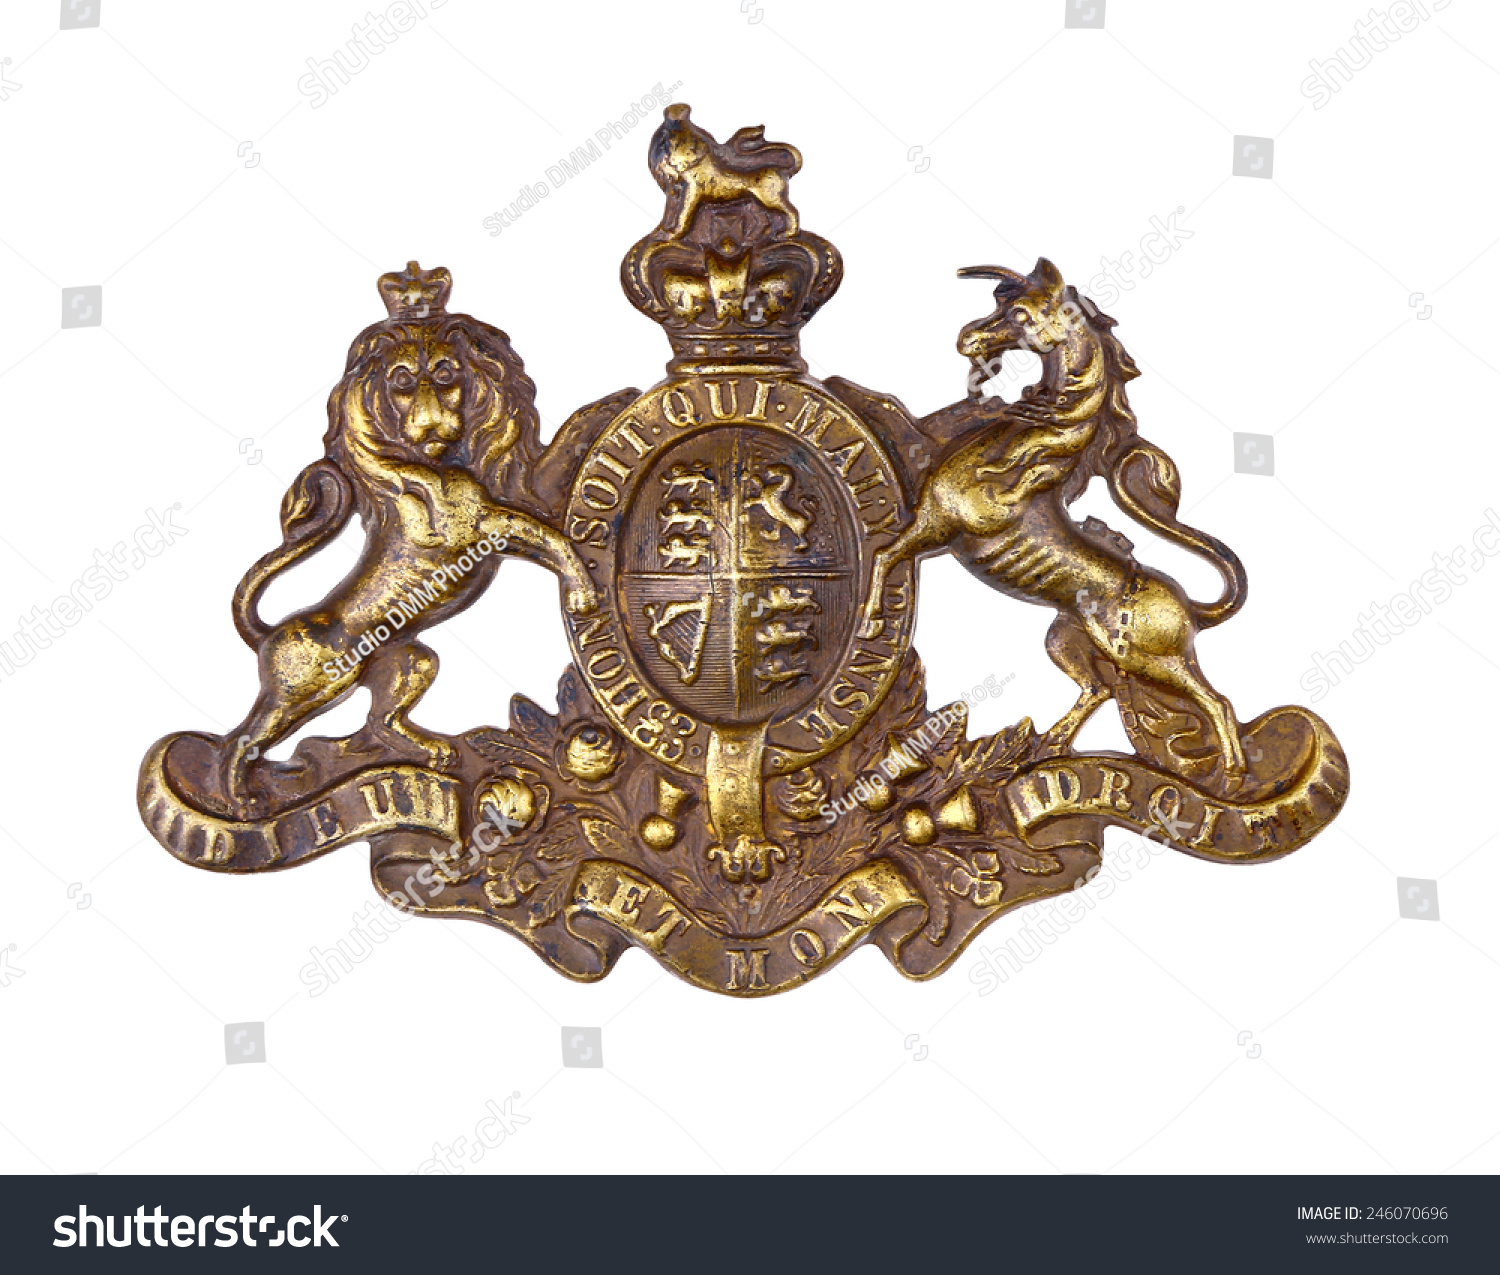 Crest Coat Arms Uk Great Britain Signs Symbols Stock Image